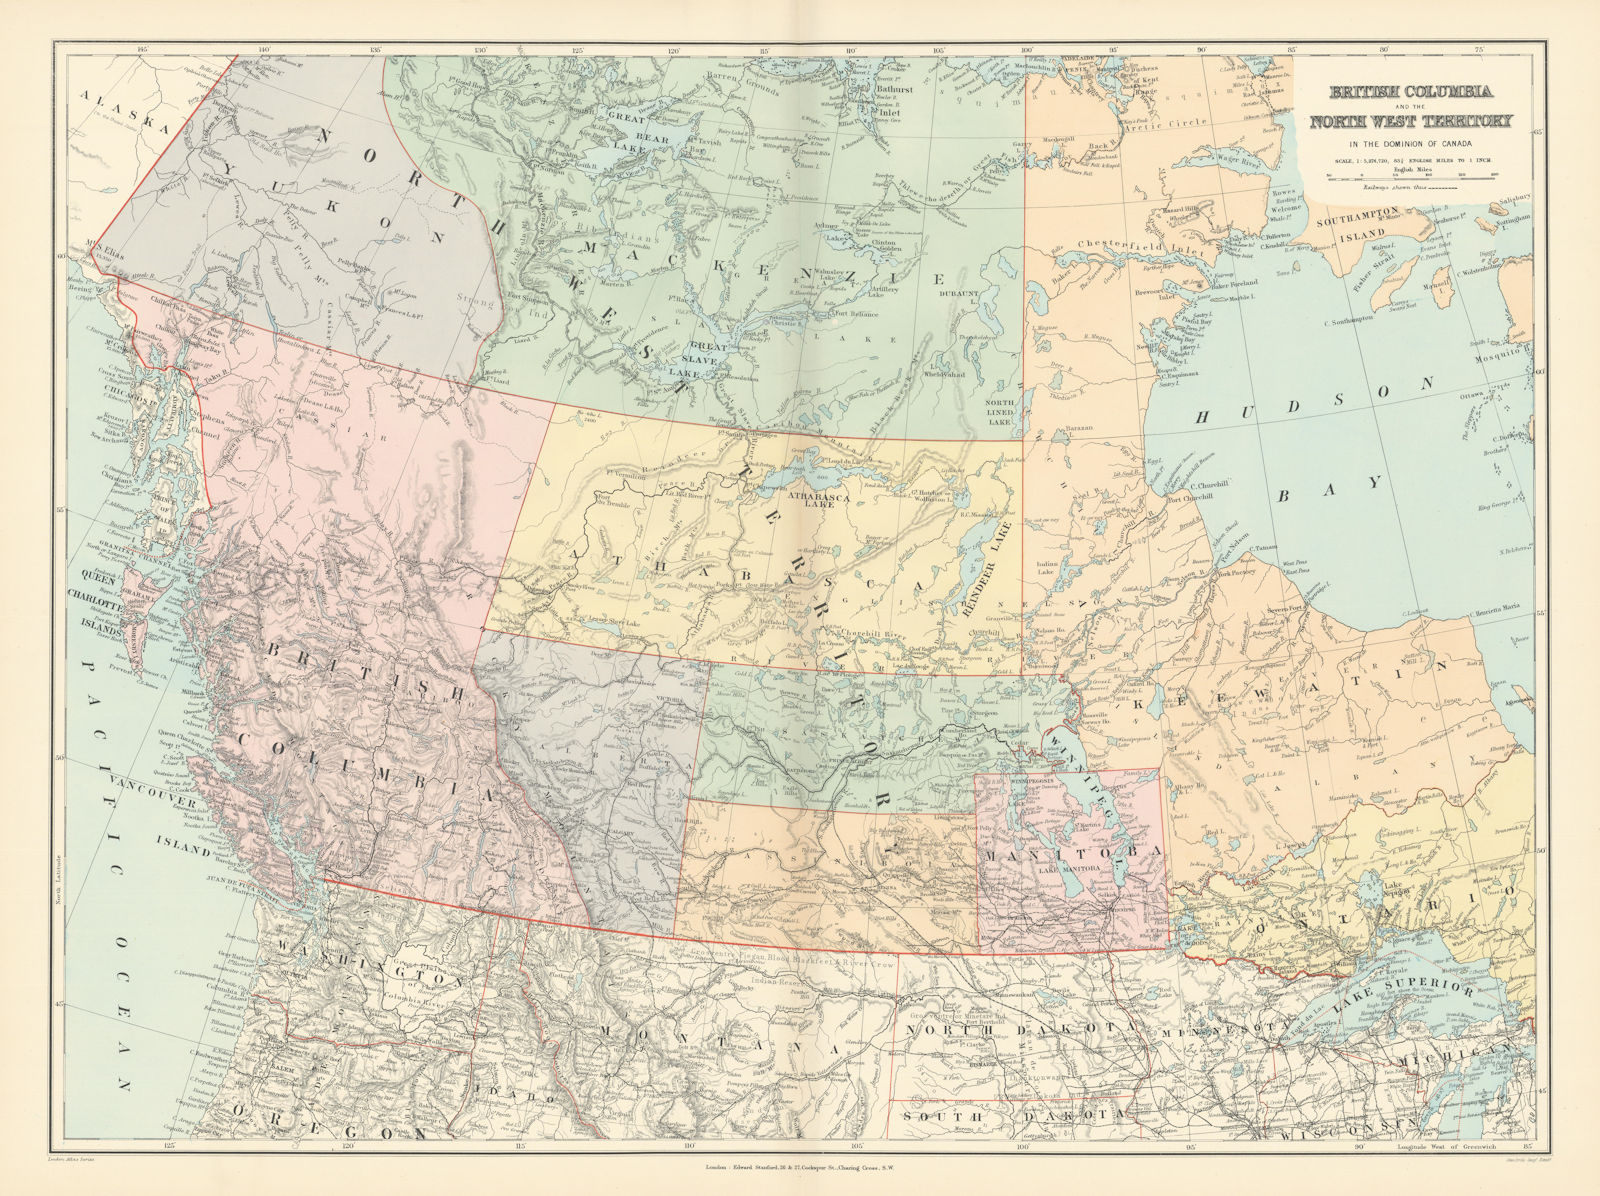 Associate Product British Columbia & Northwest Territory. Manitoba Canada. STANFORD 1896 old map